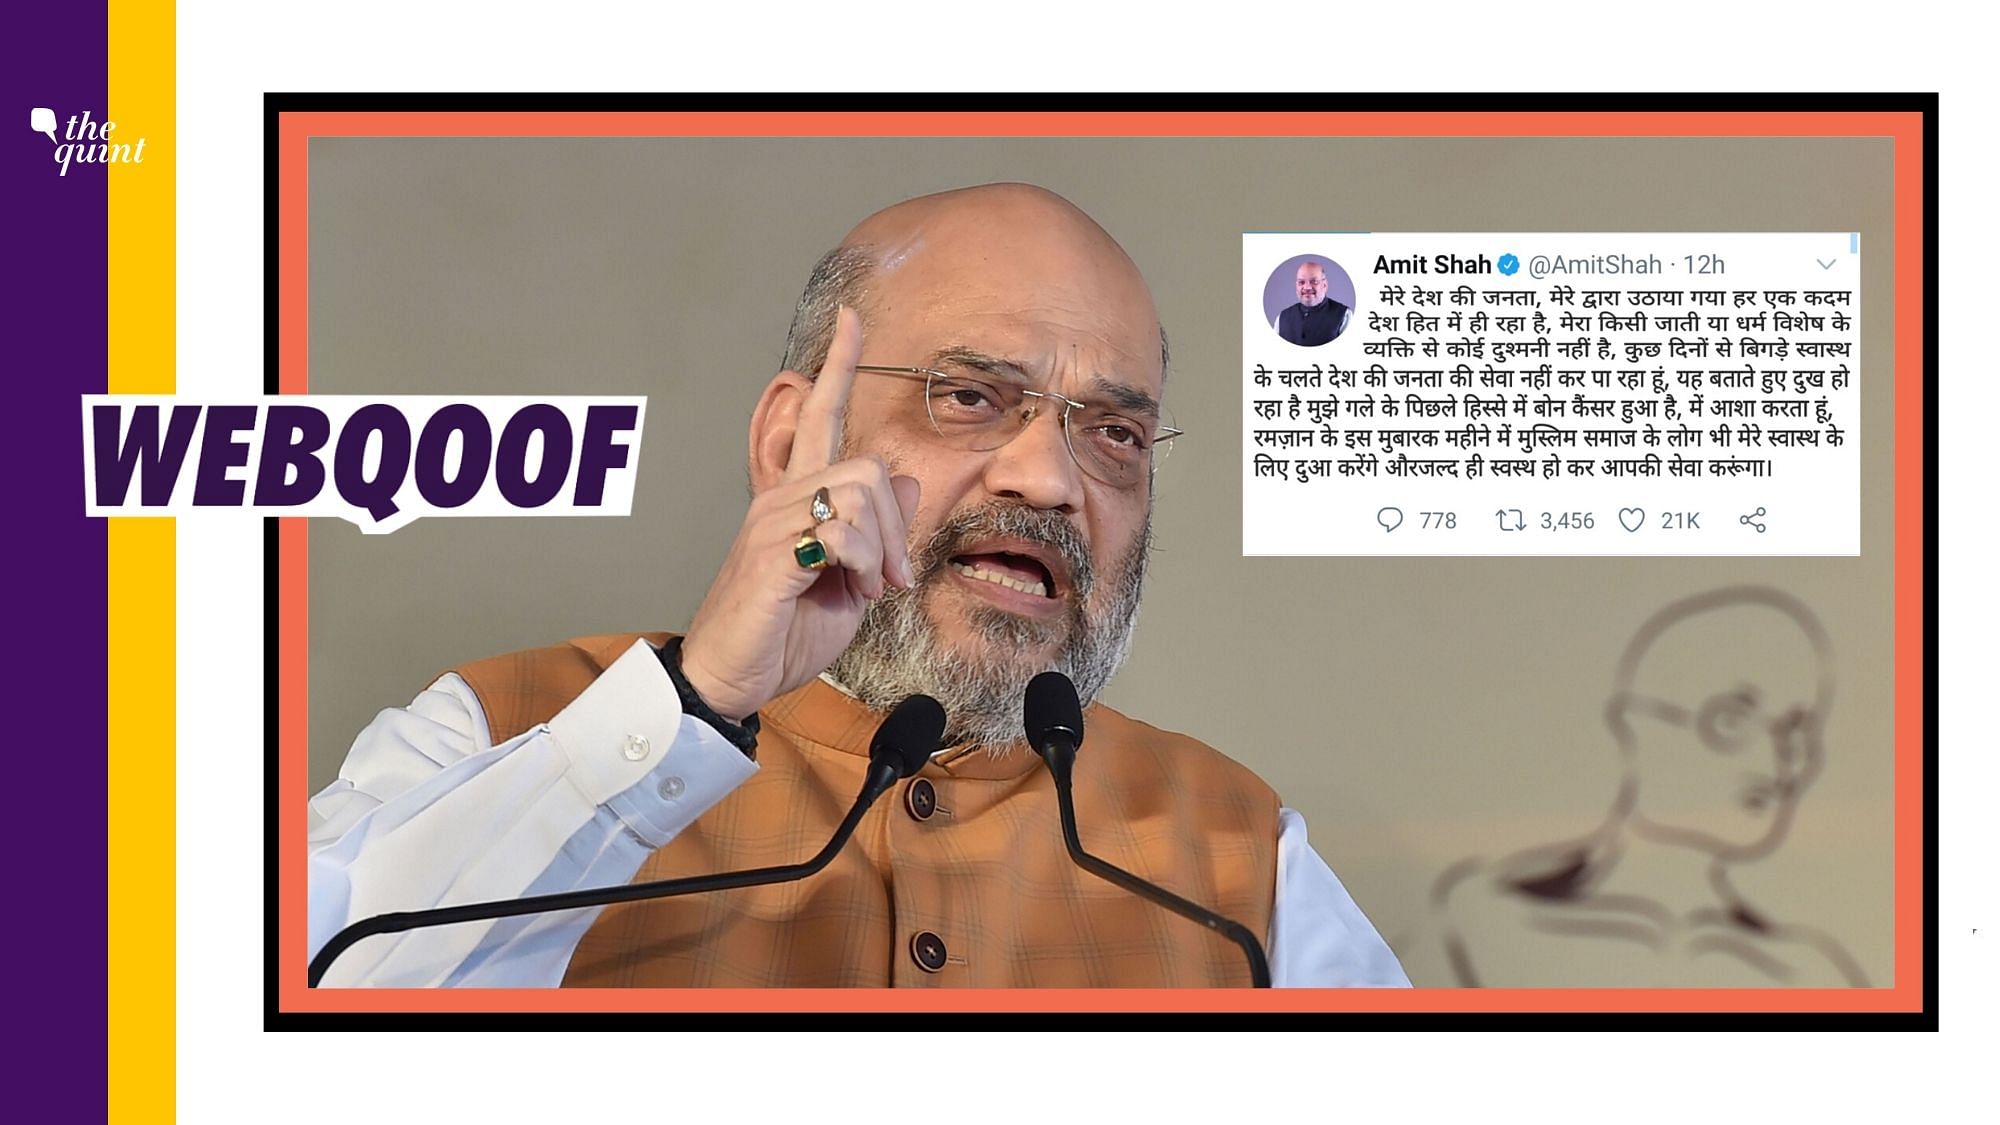 A fake tweet falsely claimed that Home Minister Amit Shah has bone cancer.